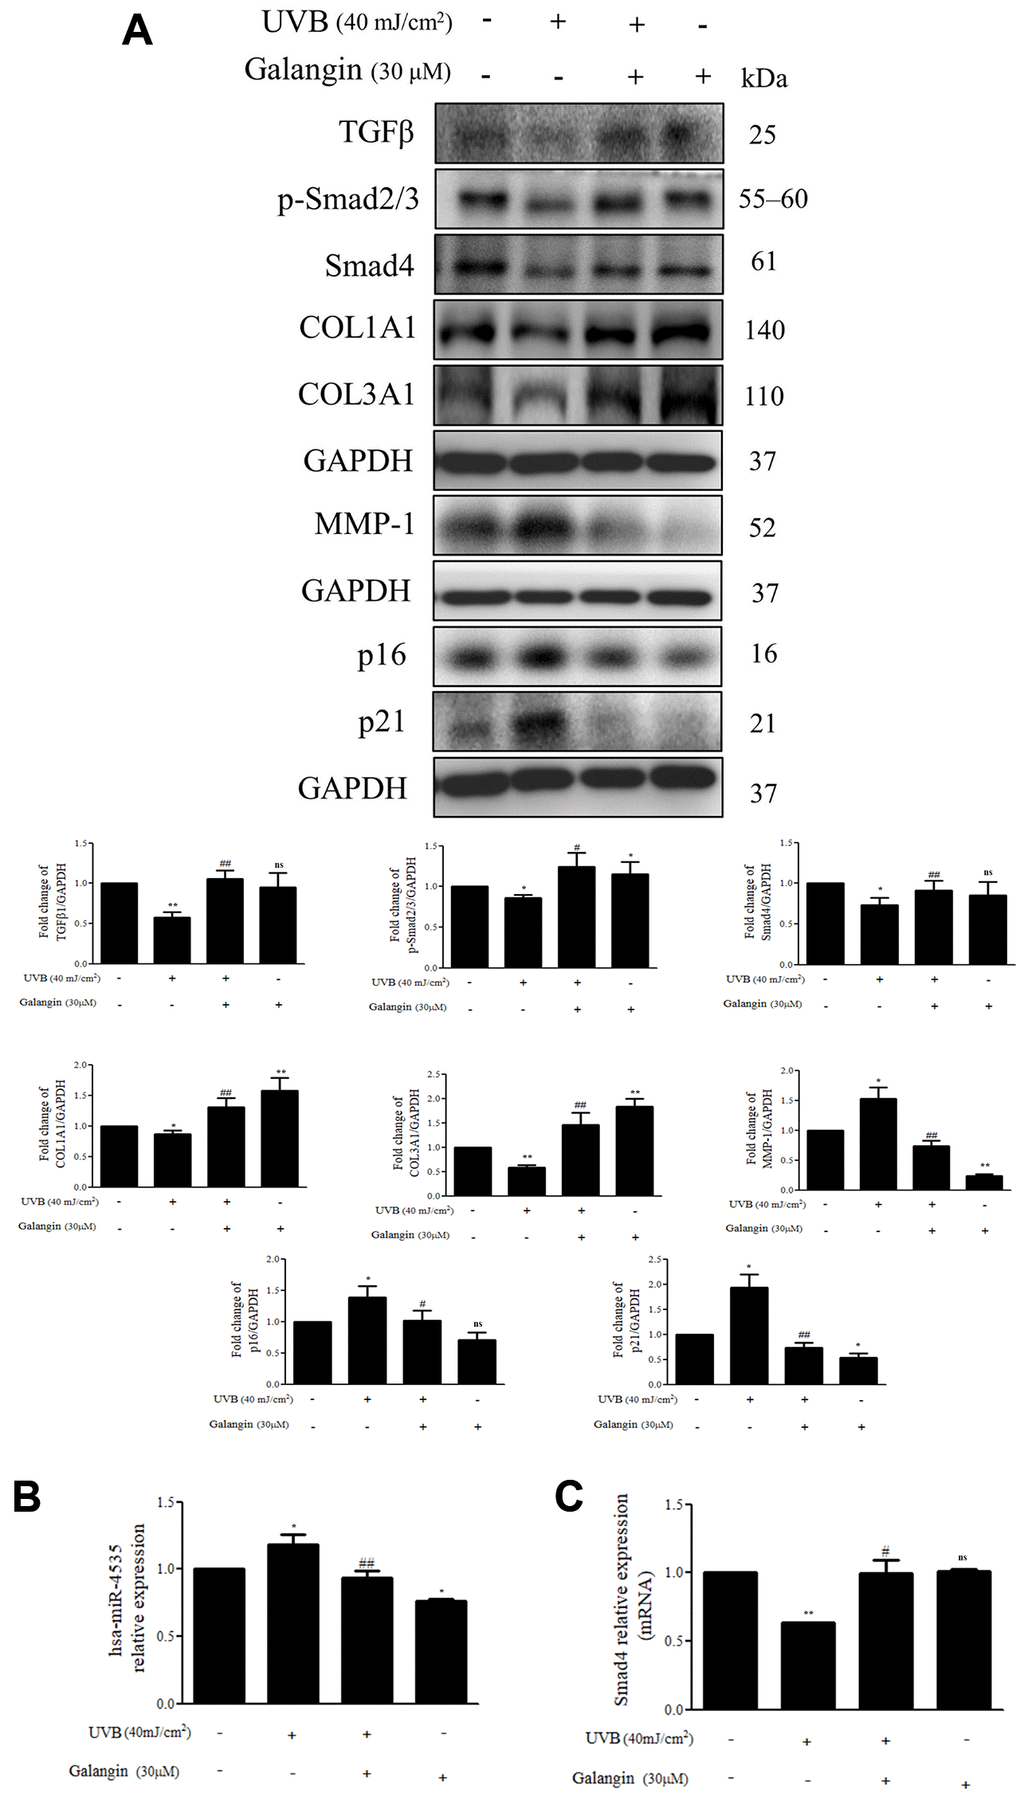 Galangin enhances TGFβ/Smad collagen synthesis pathway and attenuates dermal senescence as well as inhibition of hsa-miR-4535 expression in UVB-exposed HS68 cells. HS68 cells were exposed to UVB (40 mJ/cm2) and then treated with galangin (30 μM) for 23 h. (A) Protein expression of collagen synthesis-related pathway components (TGFβ, p-smad2/3, Smad4, COL1A1, COL3A1), collagen degradation-related protein (MMP-1), and senescence-associated markers (p16 and p21) was detected by western blot. GAPDH was used as a loading control. (B and C) RNA expression of hsa-miR-4535 and Smad4 was detected by qRT-PCR. Values are shown as mean ± SE. Quantification of the results is shown (n = 3) *P **P #P ##P 